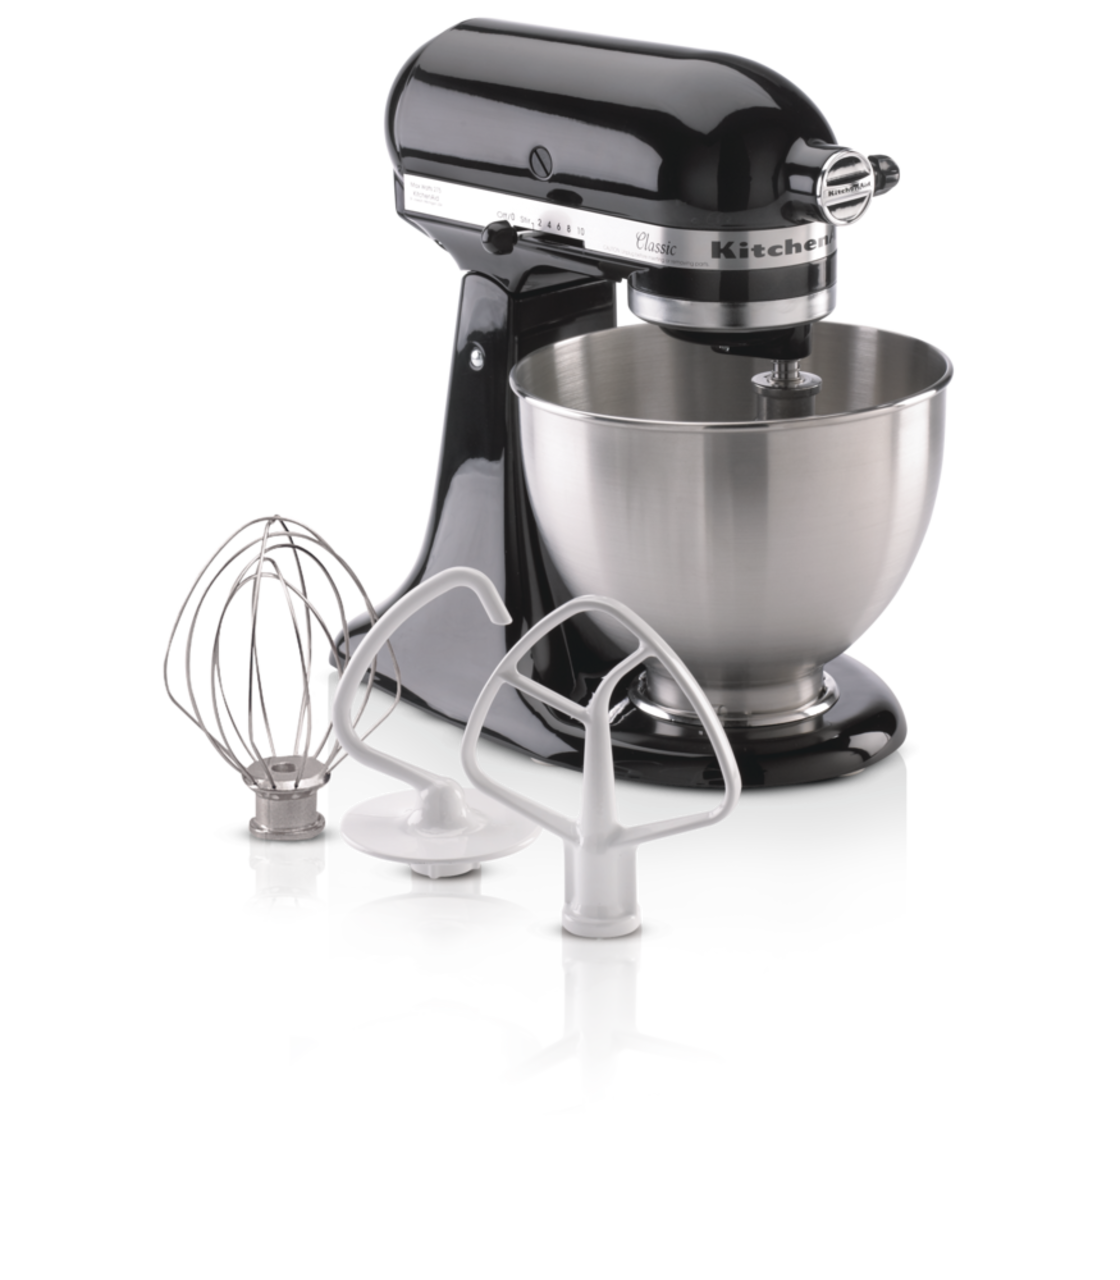 https://media-www.canadiantire.ca/product/living/kitchen/kitchen-appliances/0430685/kitchen-aid-classic-black-standmixer-e825267b-52e5-4f3e-8ad2-cc00b12dace0.png?imdensity=1&imwidth=640&impolicy=mZoom